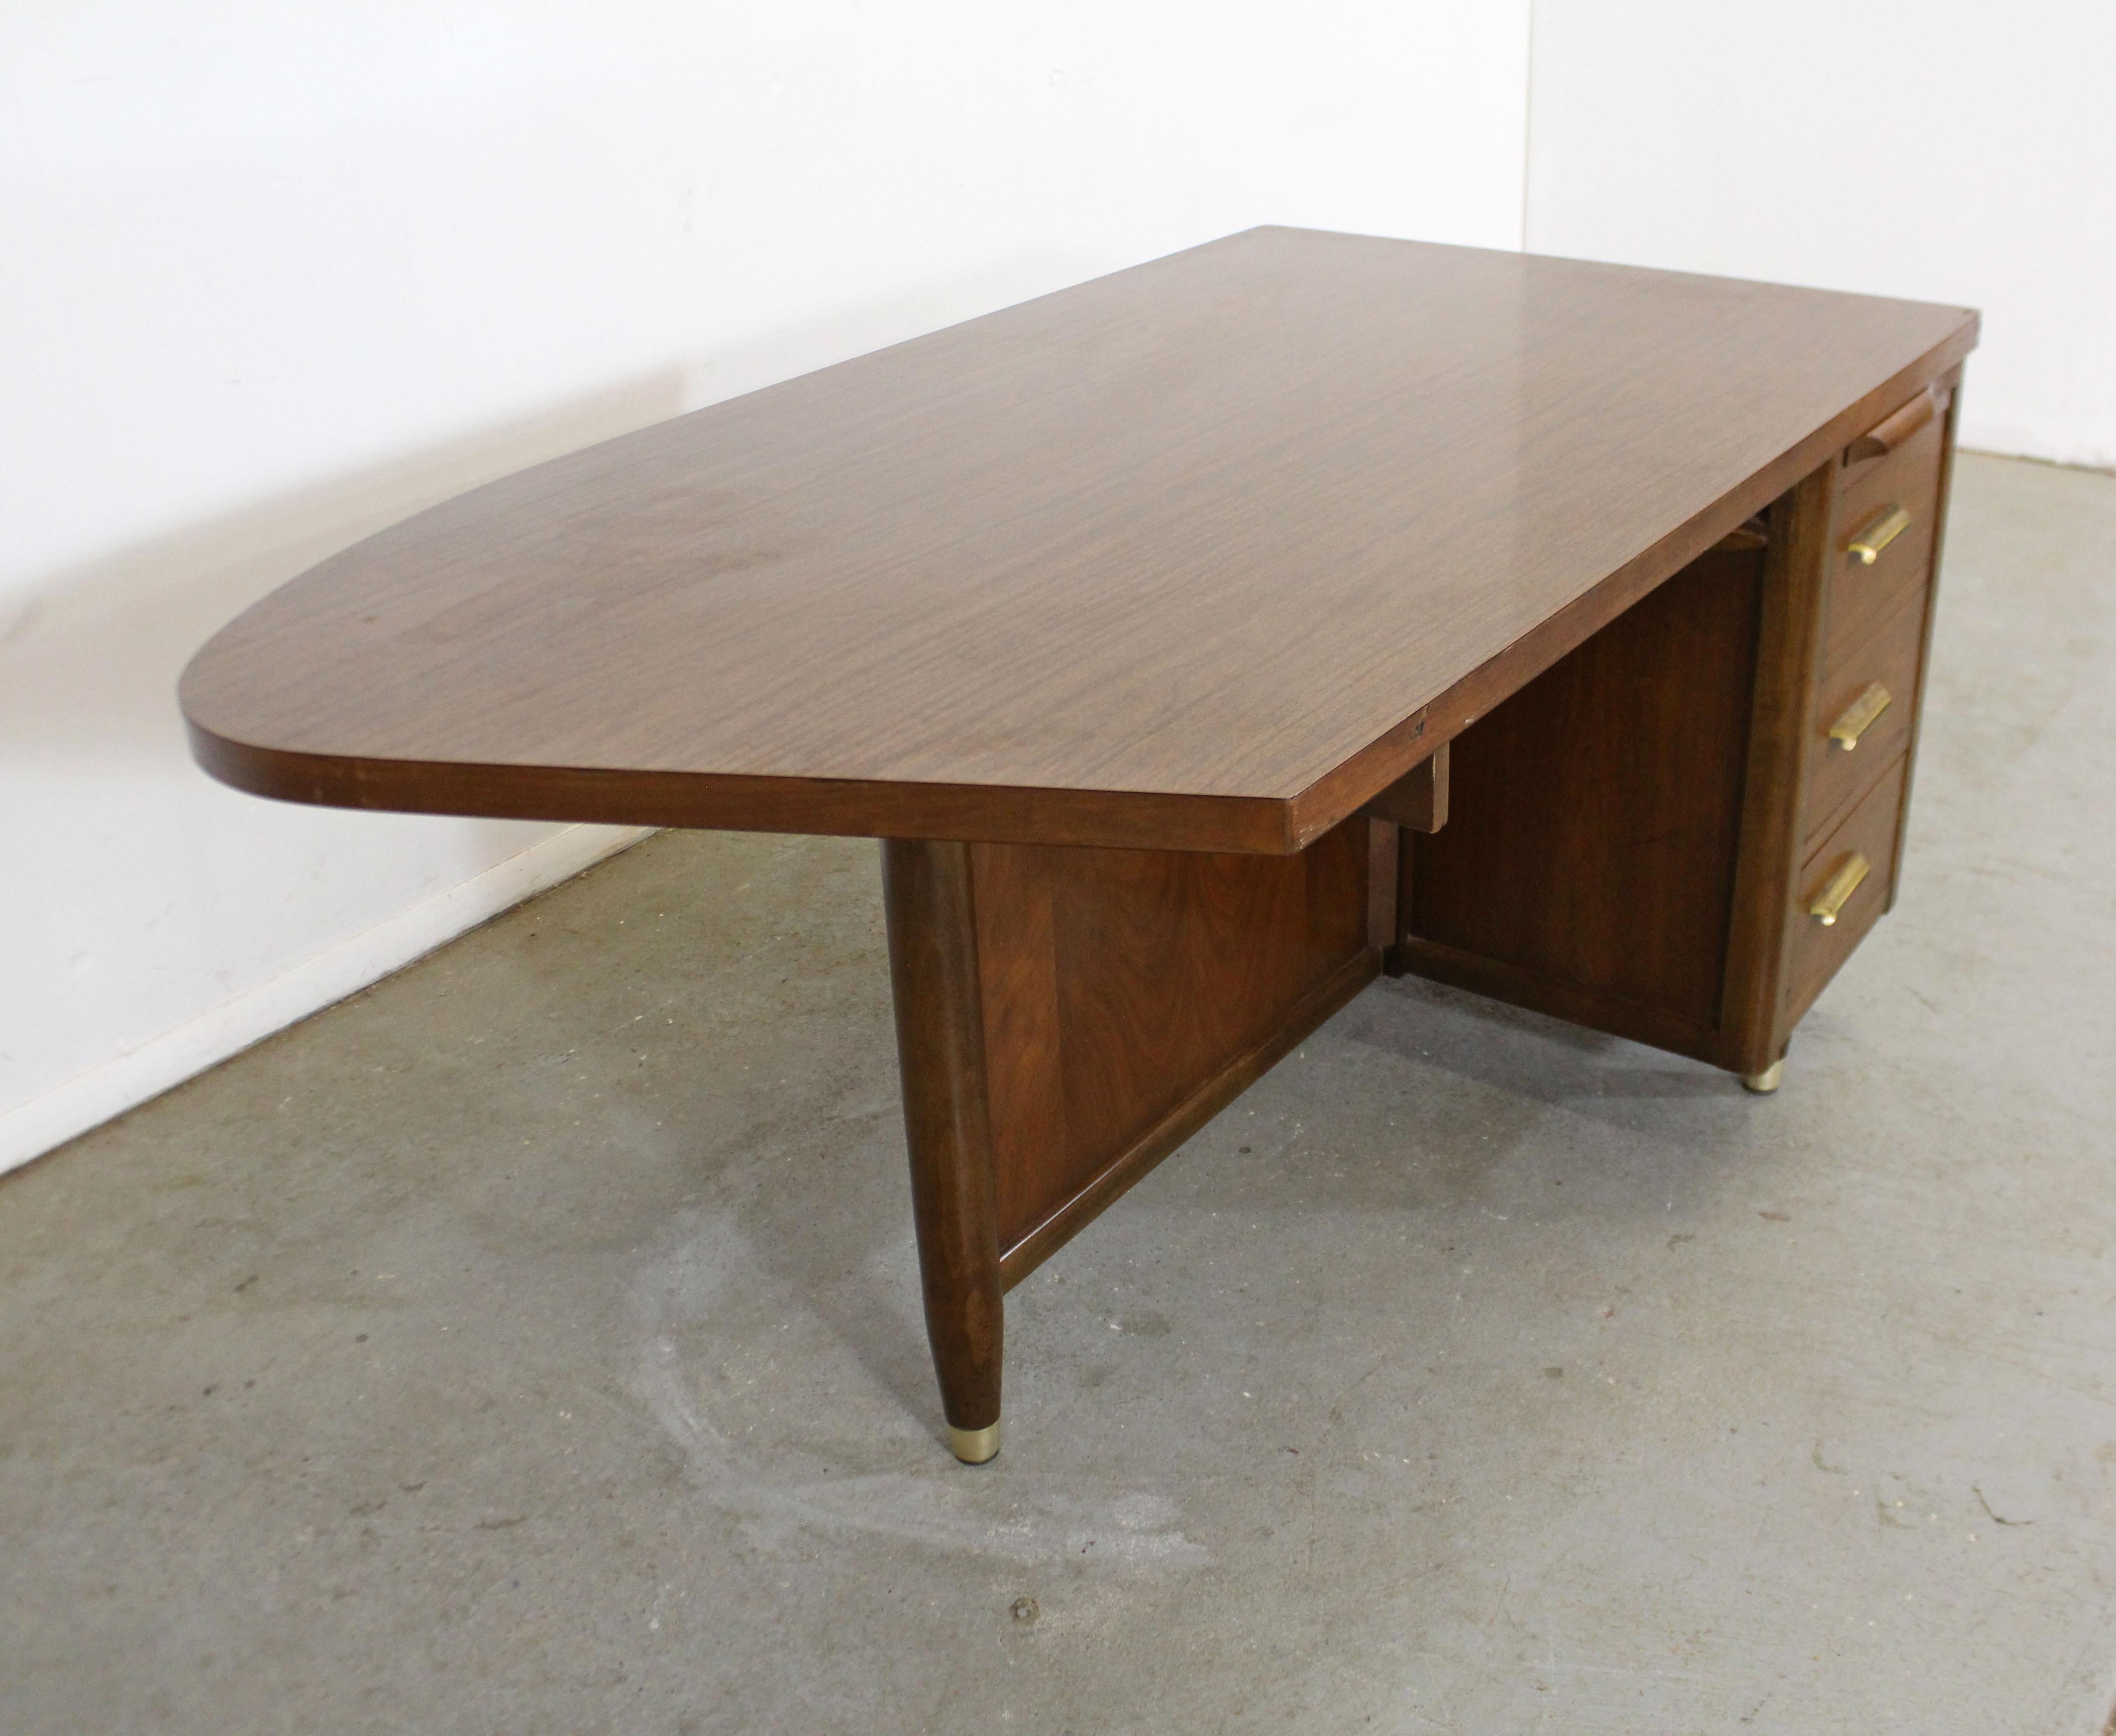 Offered is a vintage Mid-Century Modern desk with a unique shape and ample storage space. Features a curved laminate top and asymmetrical walnut base. One side of the desk features two drawers (one double drawer) and a pull-out surface. The desk is